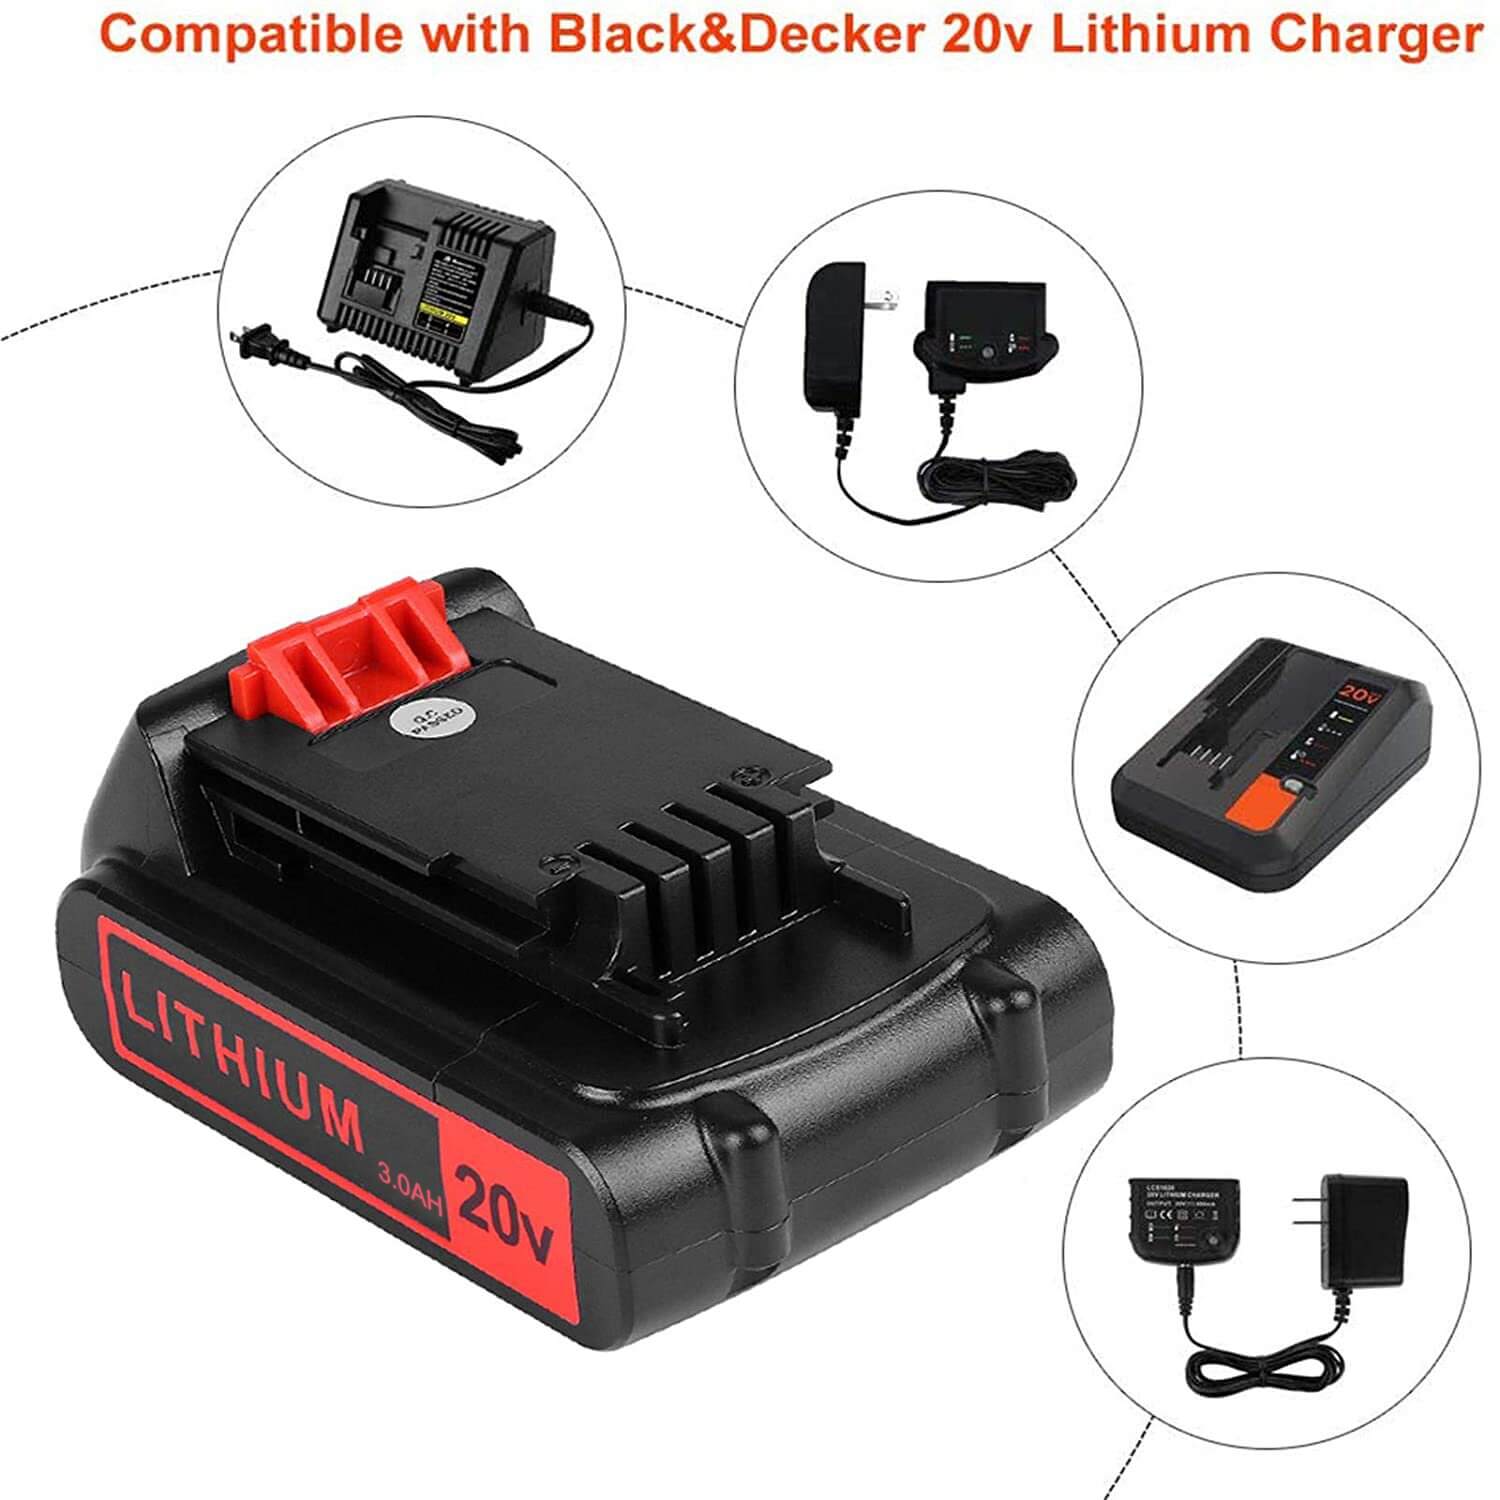 For Black and Decker 20V Battery Replacement | LBXR20 3.0Ah Li-ion Battery 4 Pack